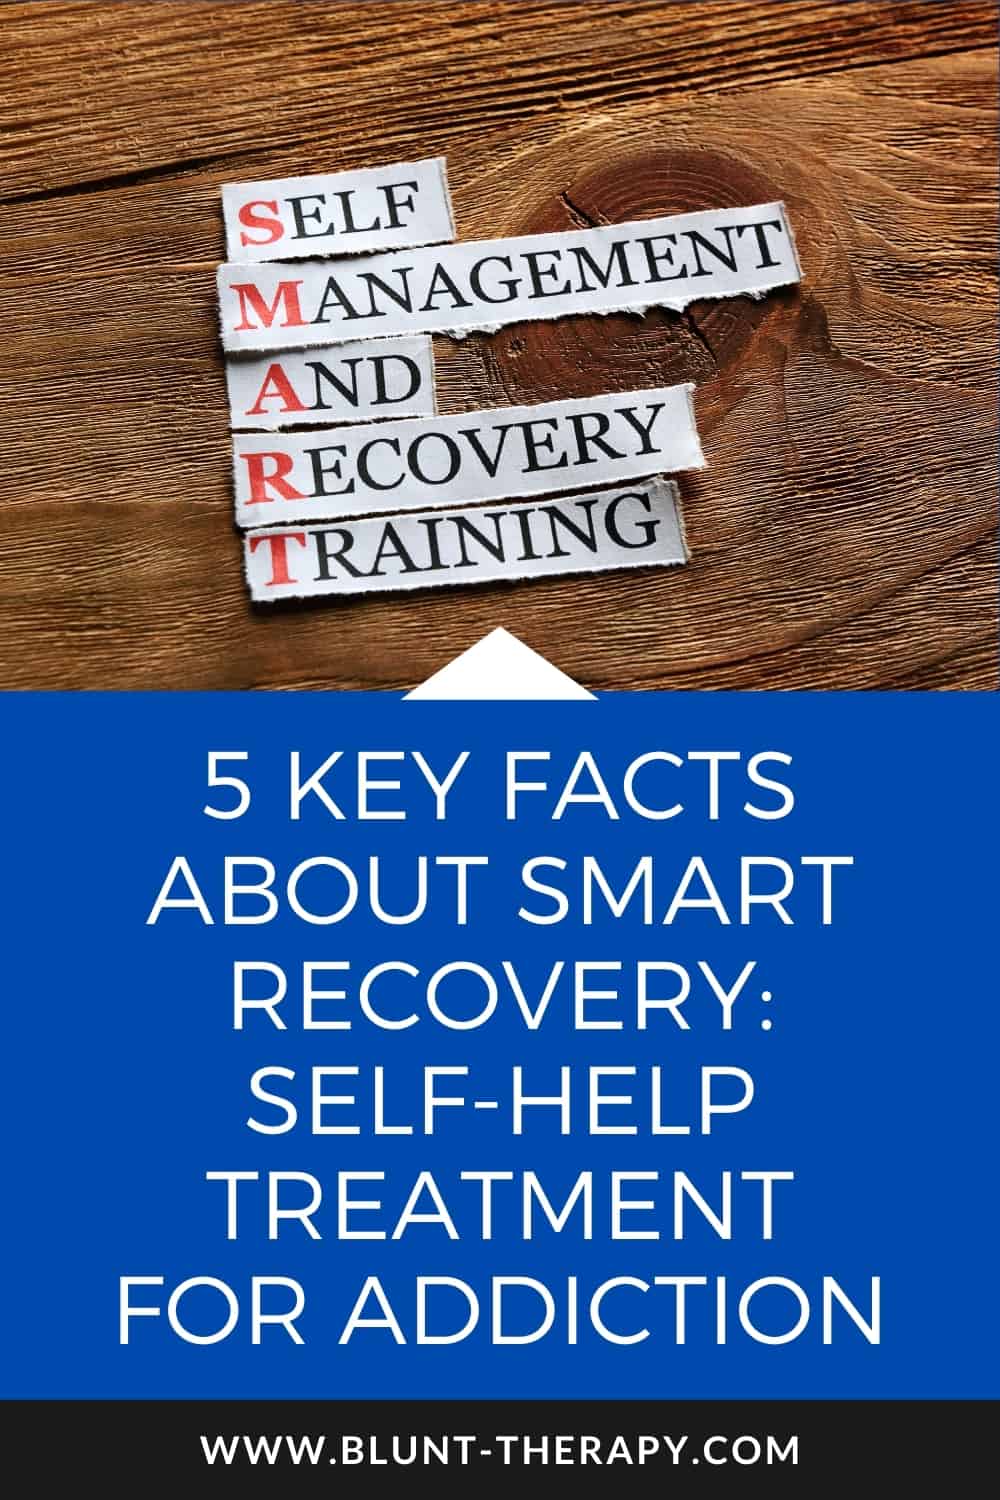 5 Key Facts About SMART Recovery A Self-Help Treatment Approach For Addiction